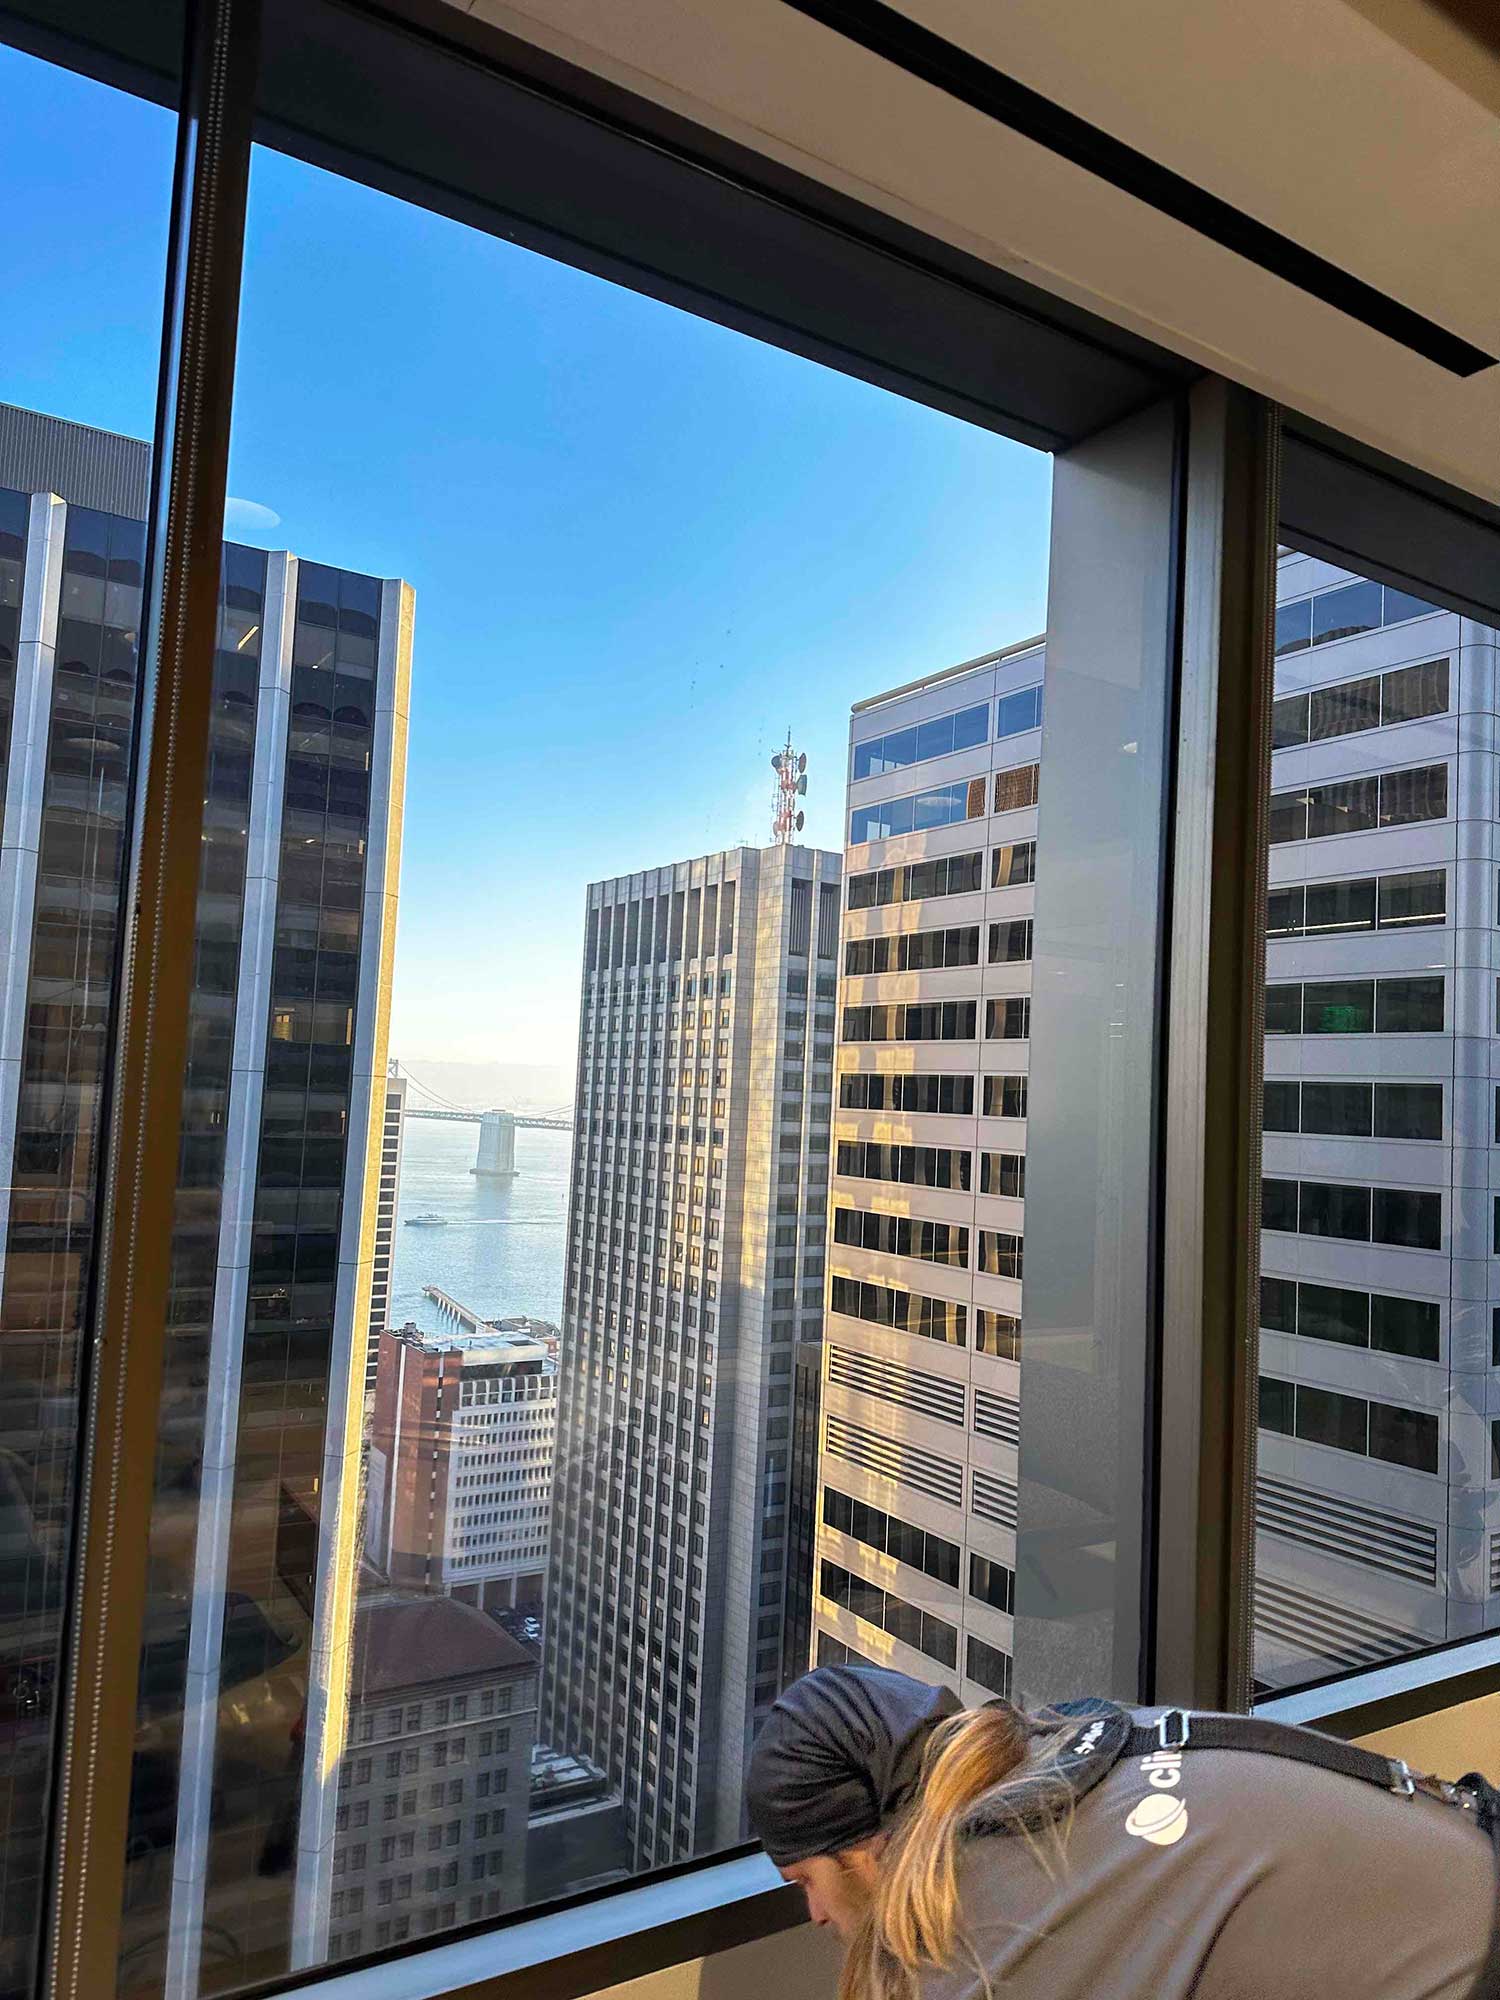 CliimatePro installs window tint in an office in San Francisco. Window film reduces glare, UV rays, and eye strain. Get a free estimate today.